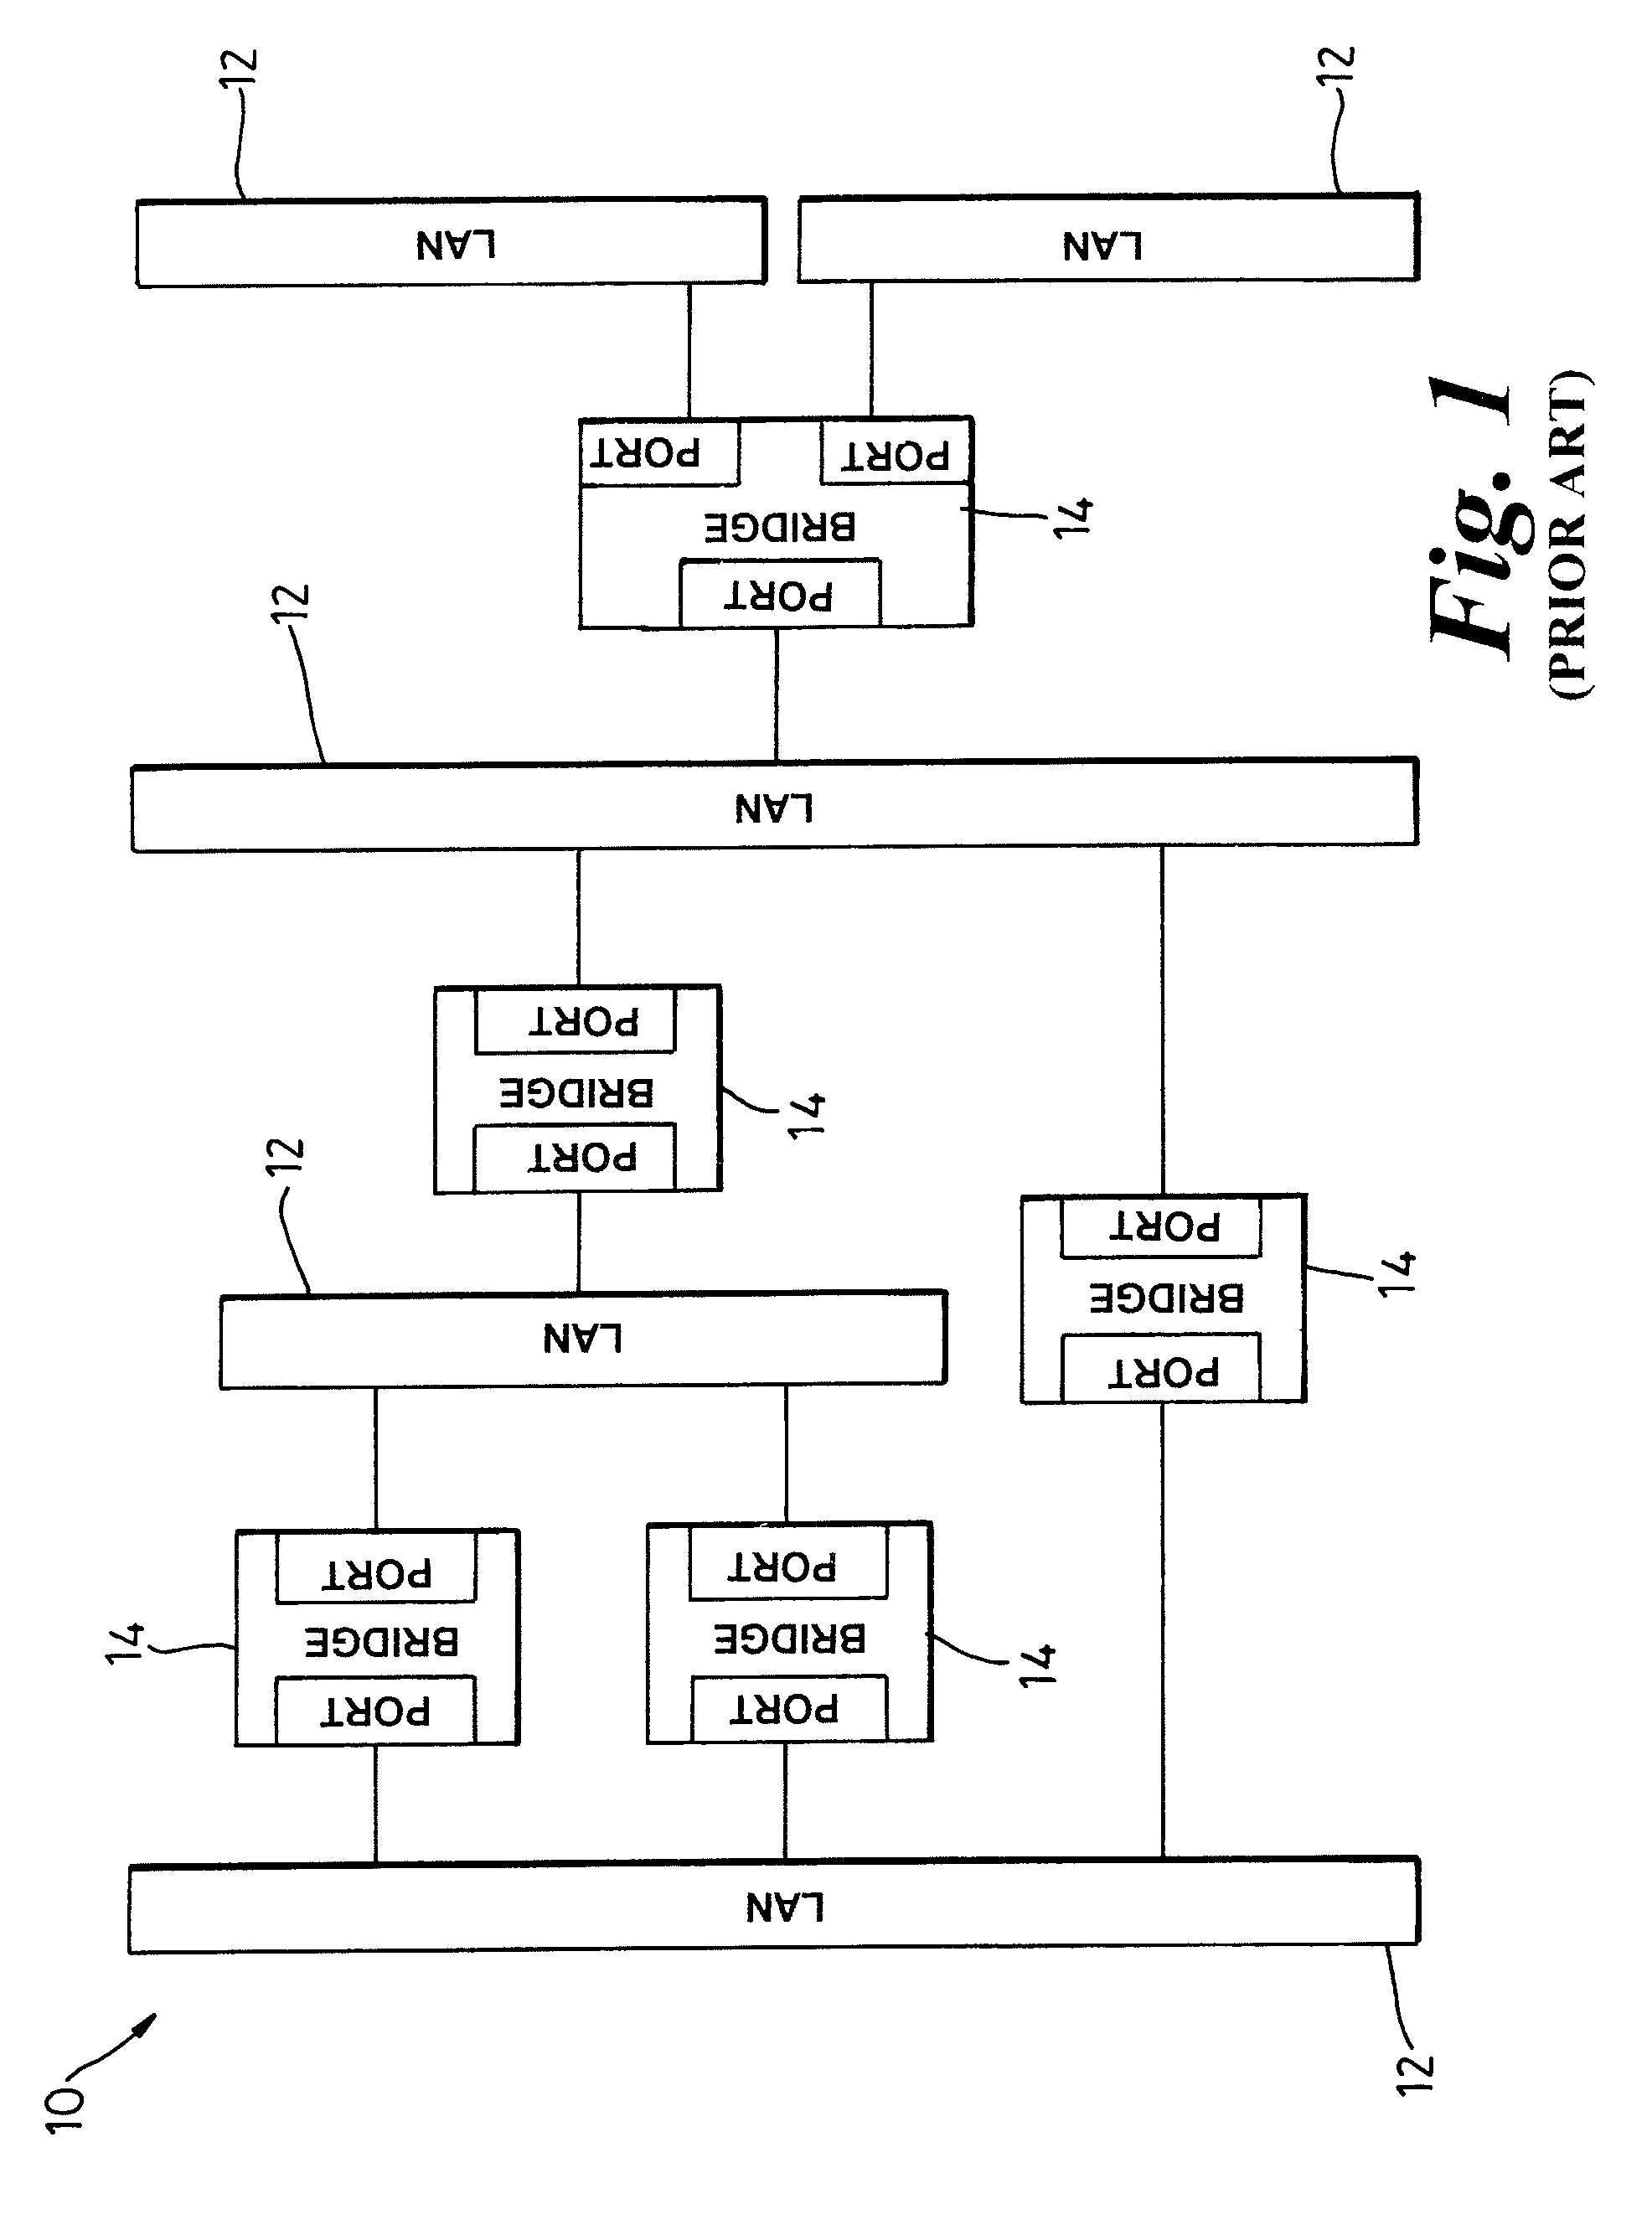 Differential forwarding in address-based carrier networks